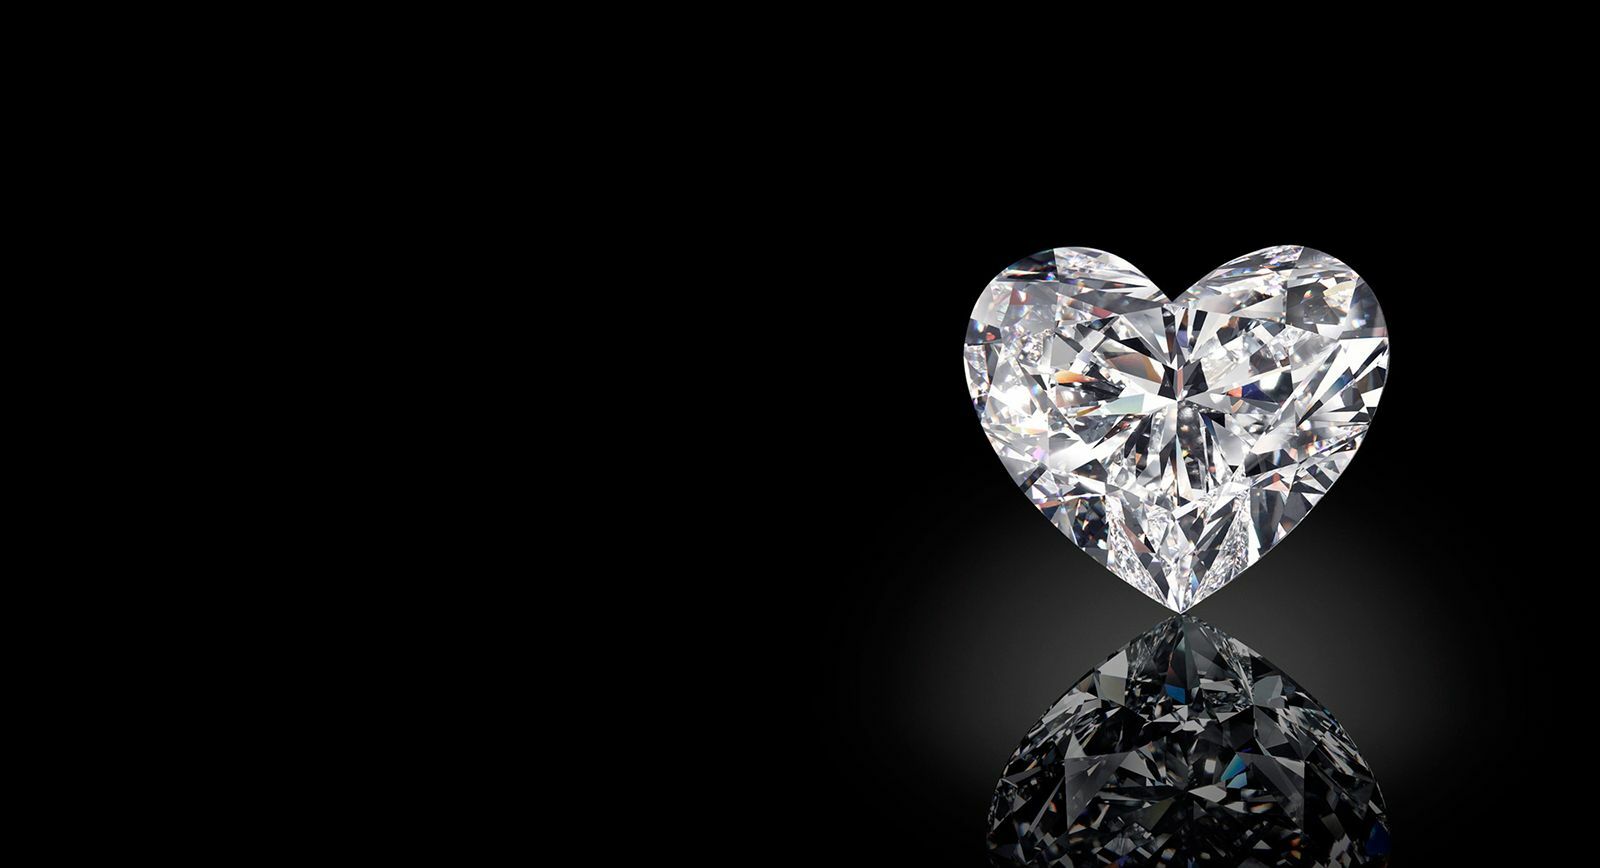 Valentine’s Day Special: Not just another heart jewel